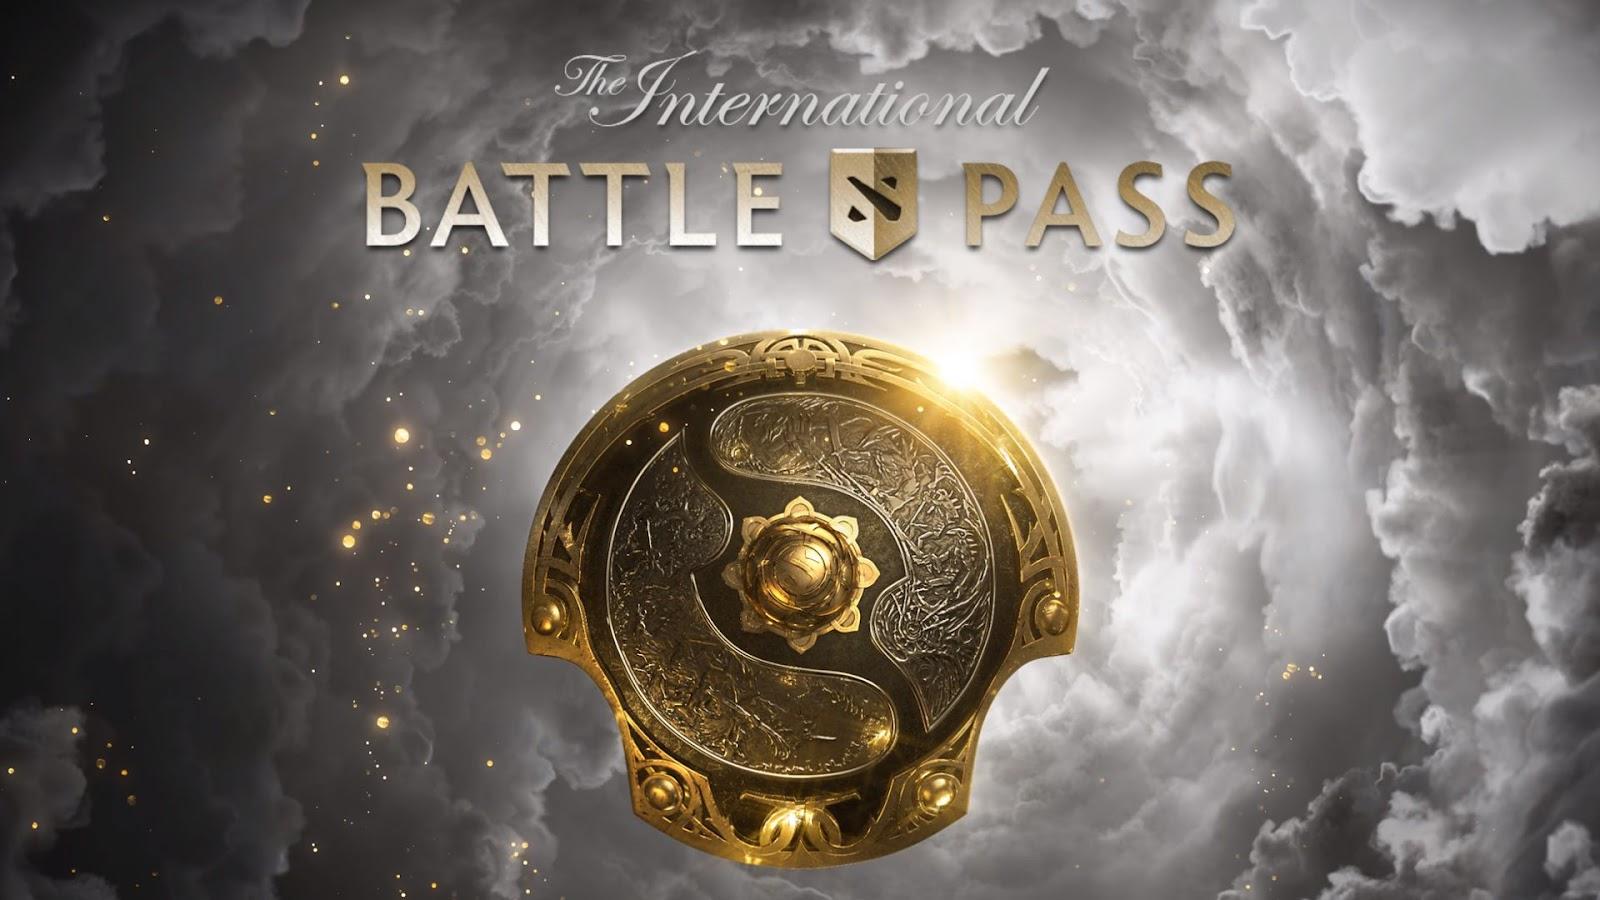 Valve is looking to structure the TI battle pass a bit differently this year which will drop later this summer